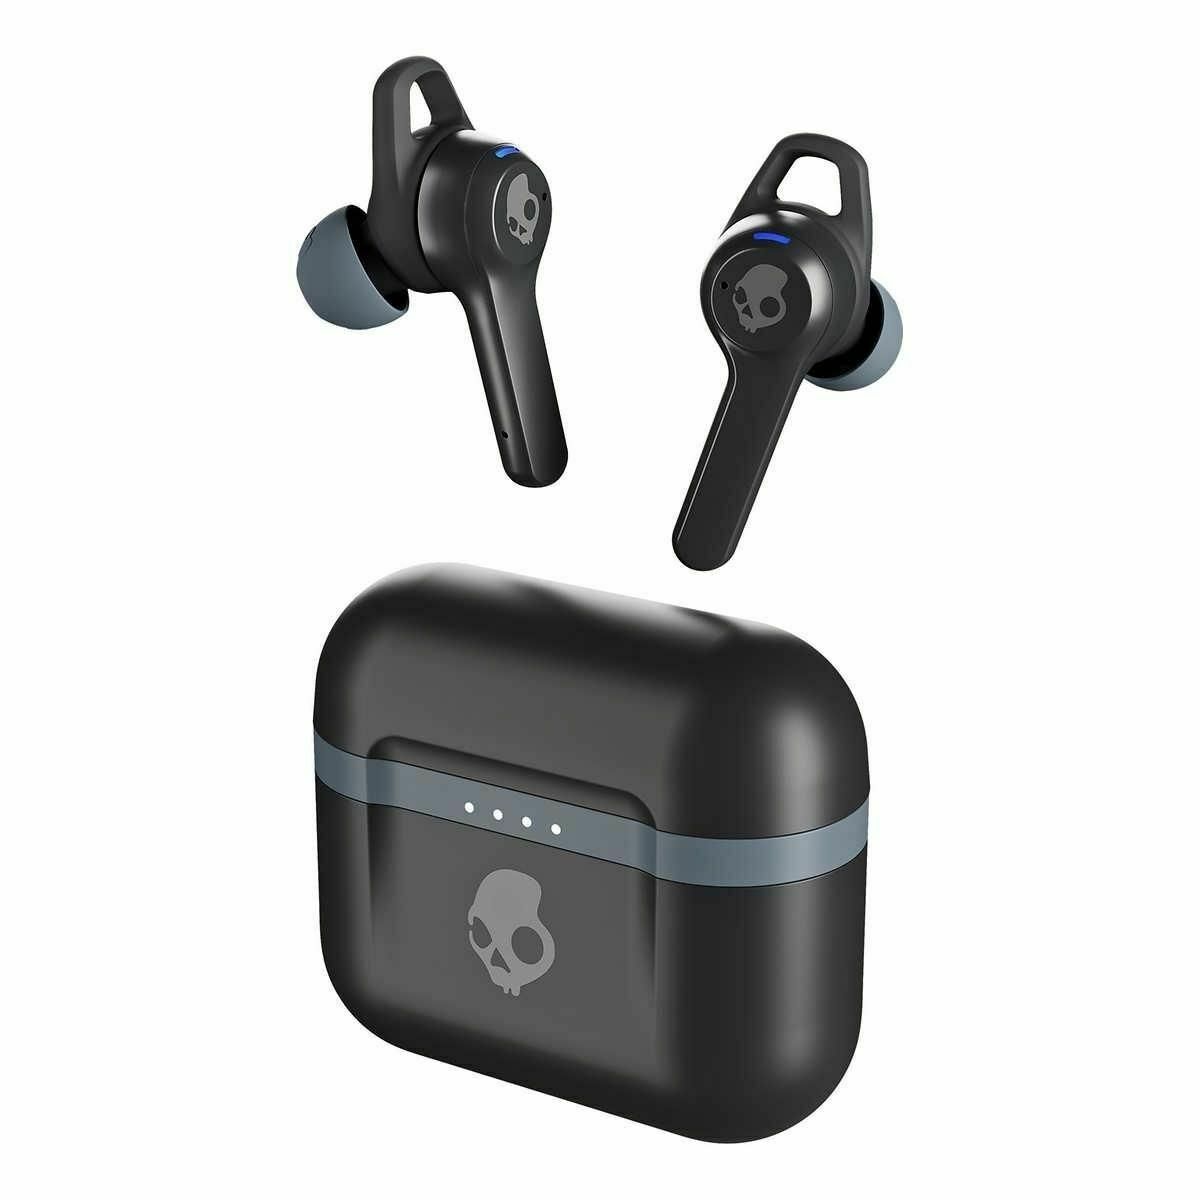 Skullcandy Indy ANC Fuel Noise Canceling Bluetooth Earbuds (Refurbished) $19.75 + 5% SD Cashback + Free Shipping